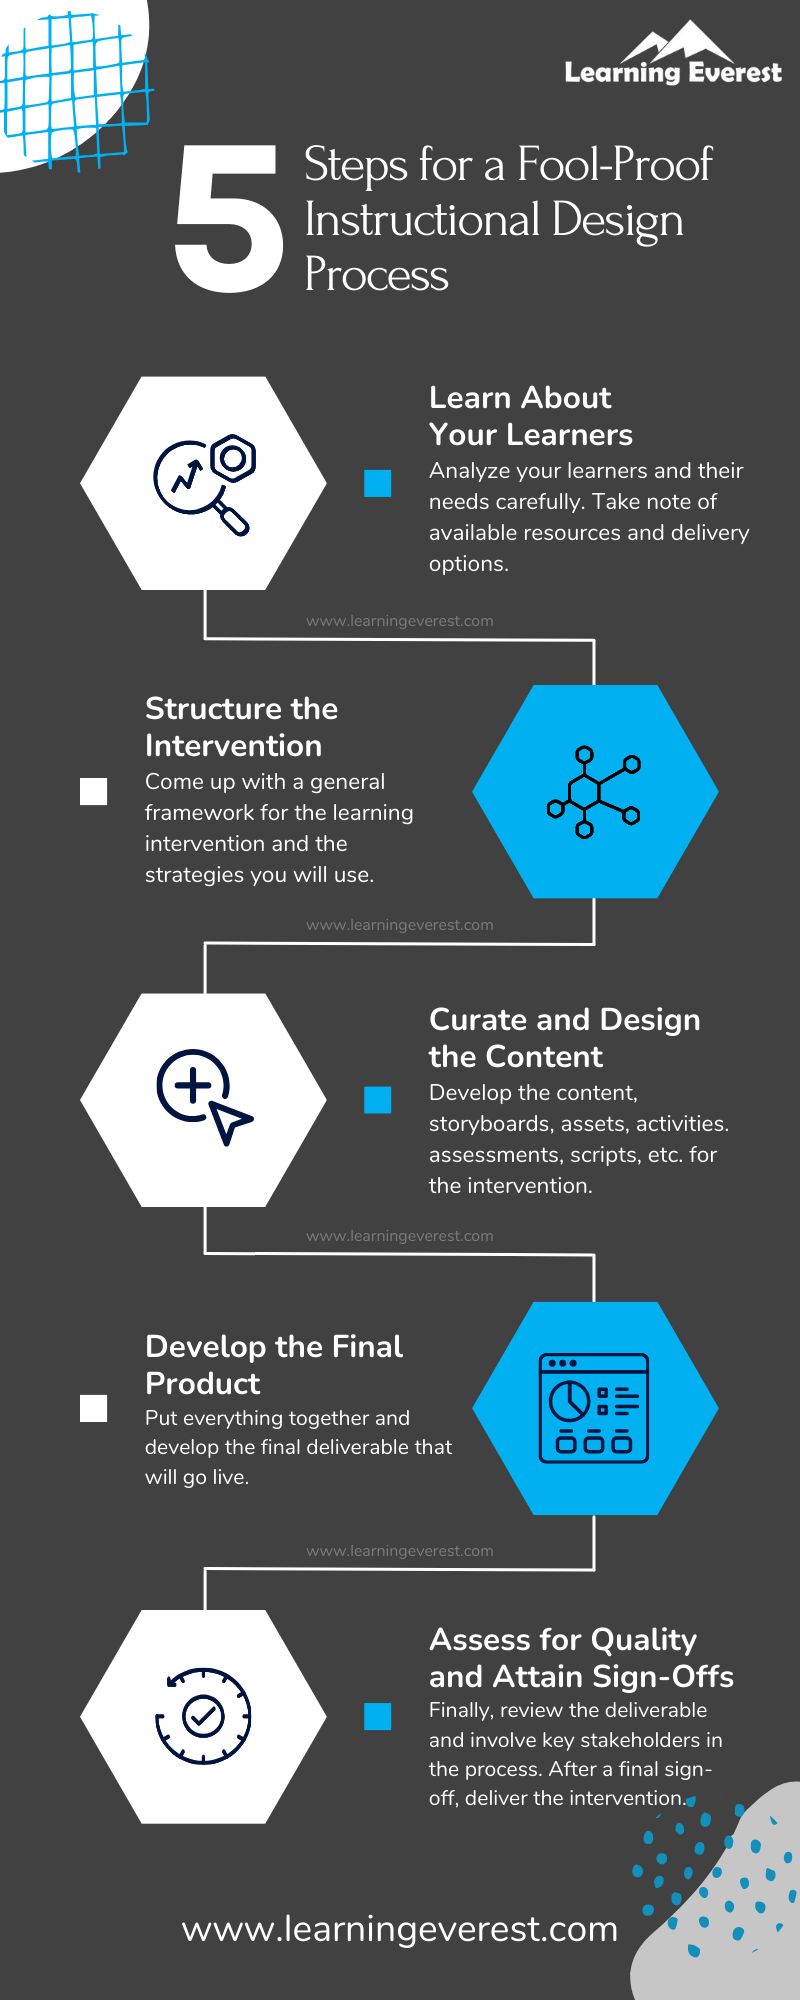 5 Steps for a Fool-Proof Instructional Design Process